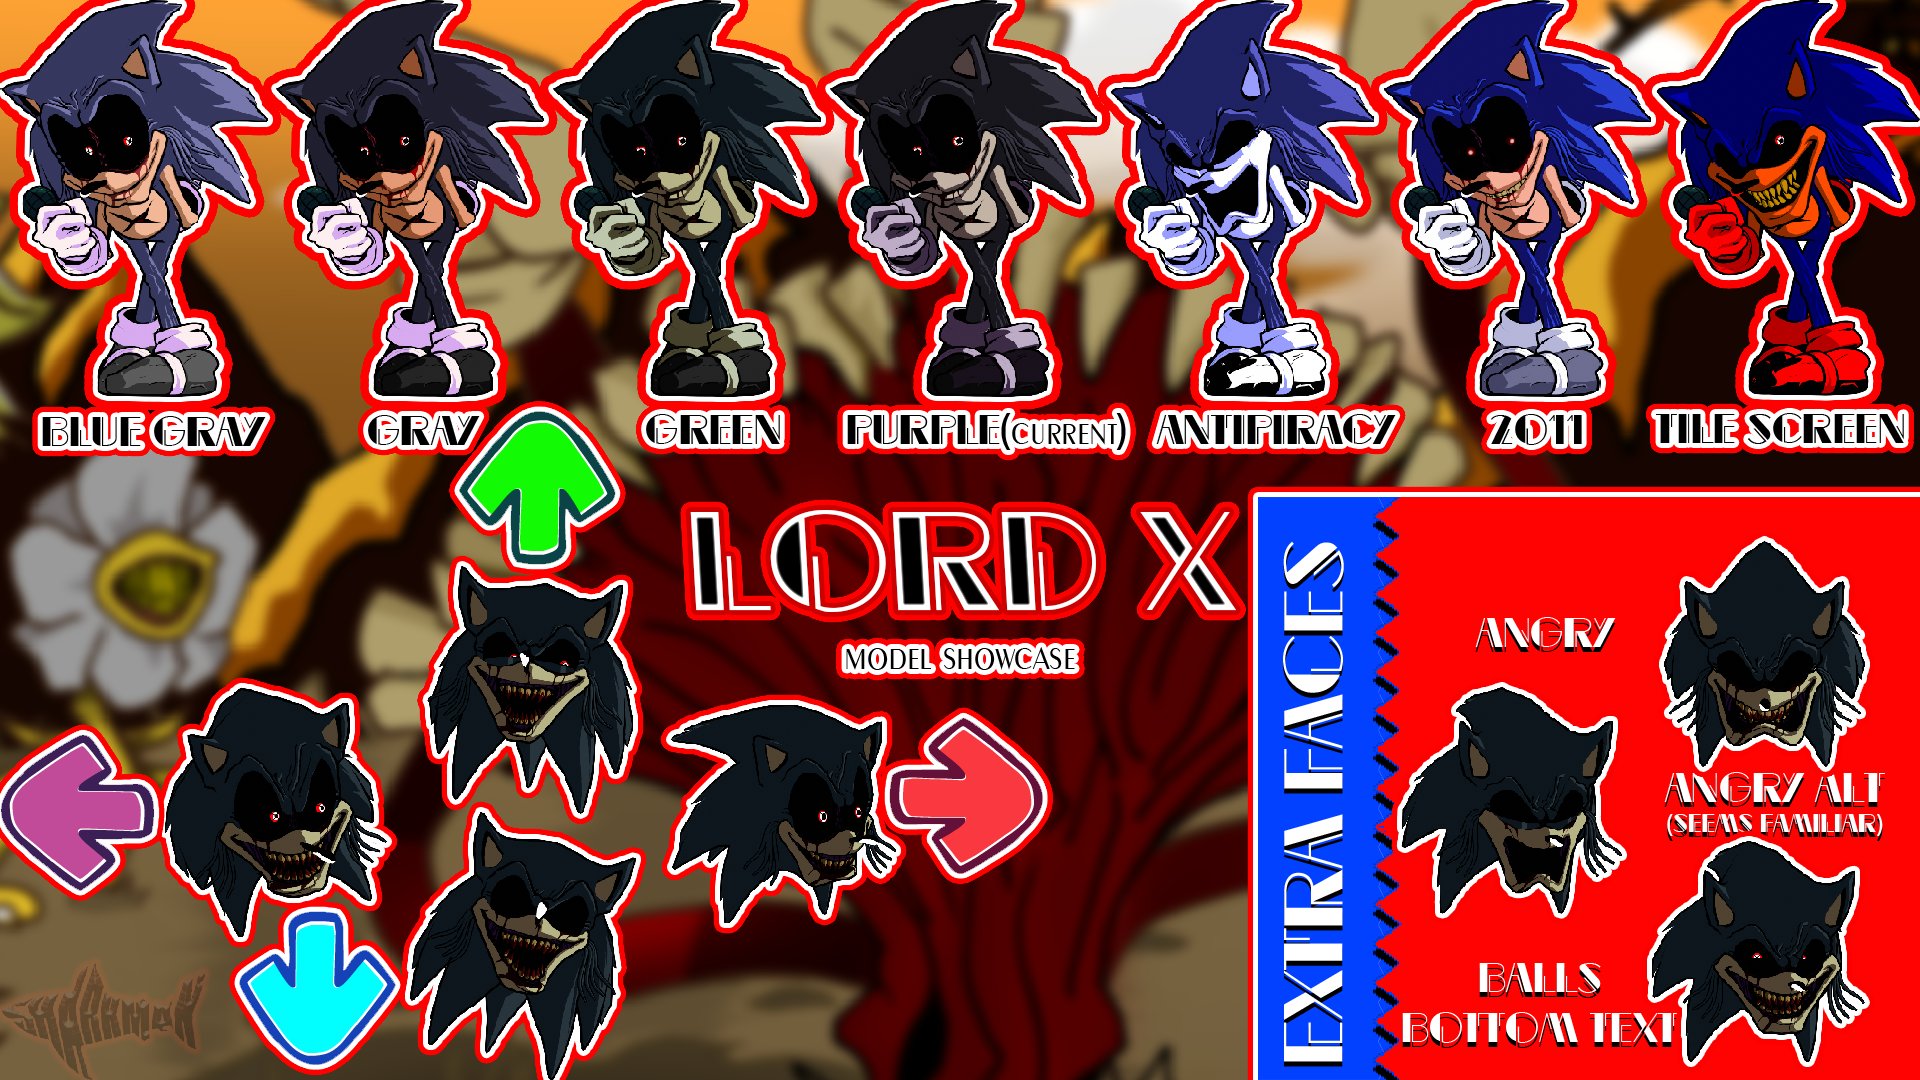 What's your preffered Faker Lord X Sprites